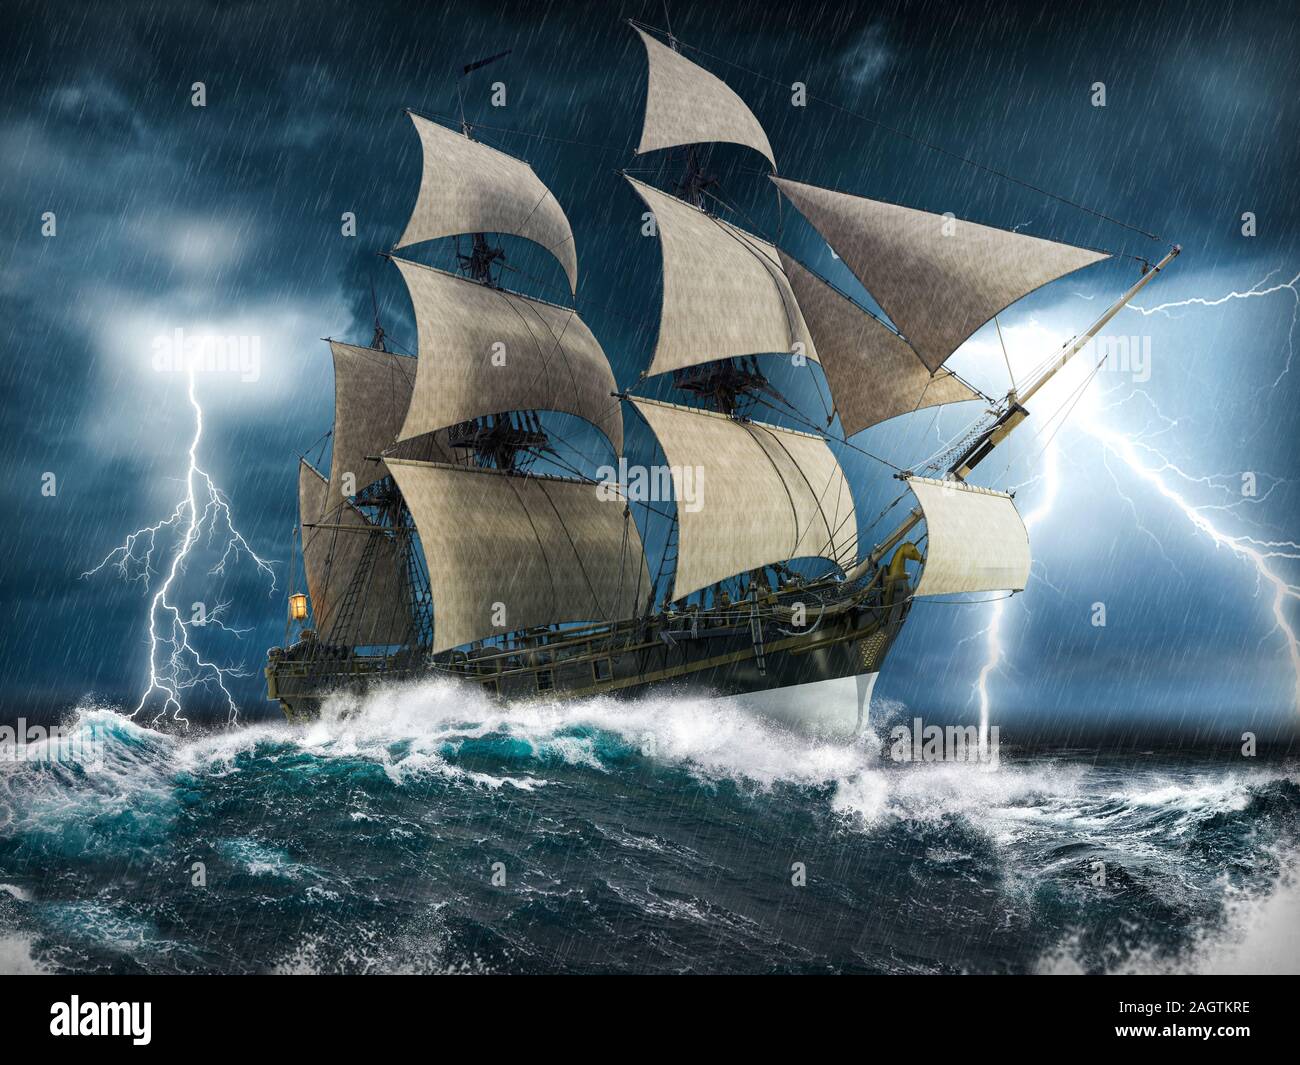 Ocean sailing ship in distress, struggling to stay afloat, in a heavy storm with big waves and lightning, 3d render painting Stock Photo